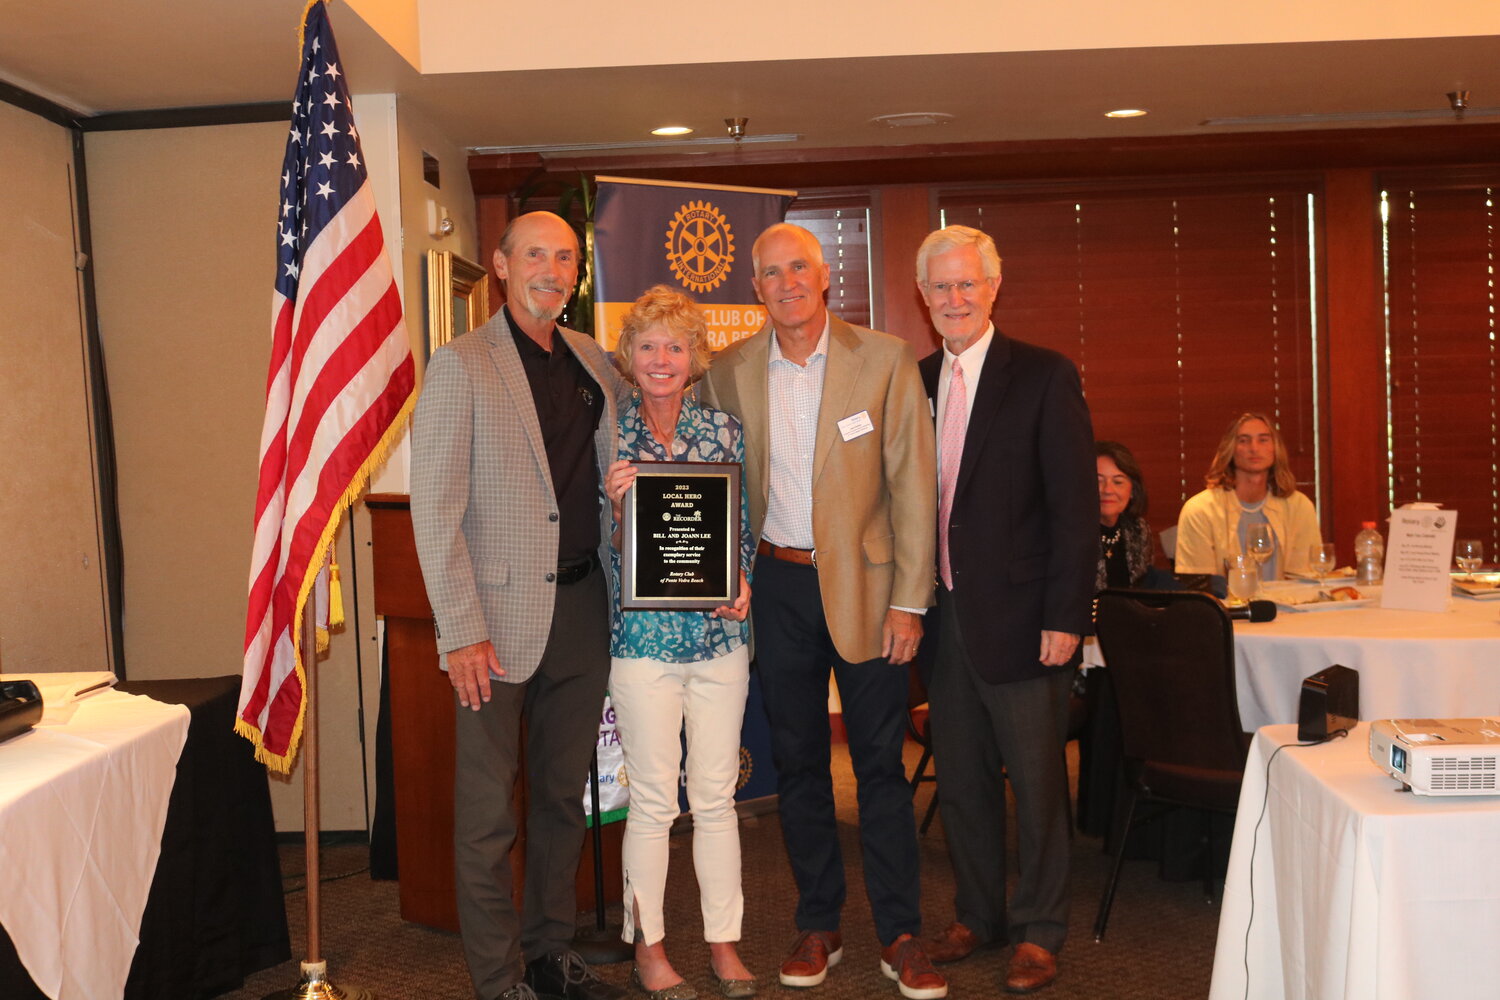 Bill and JoAnn Lee were recognized for their years of faithful commitment to community service.